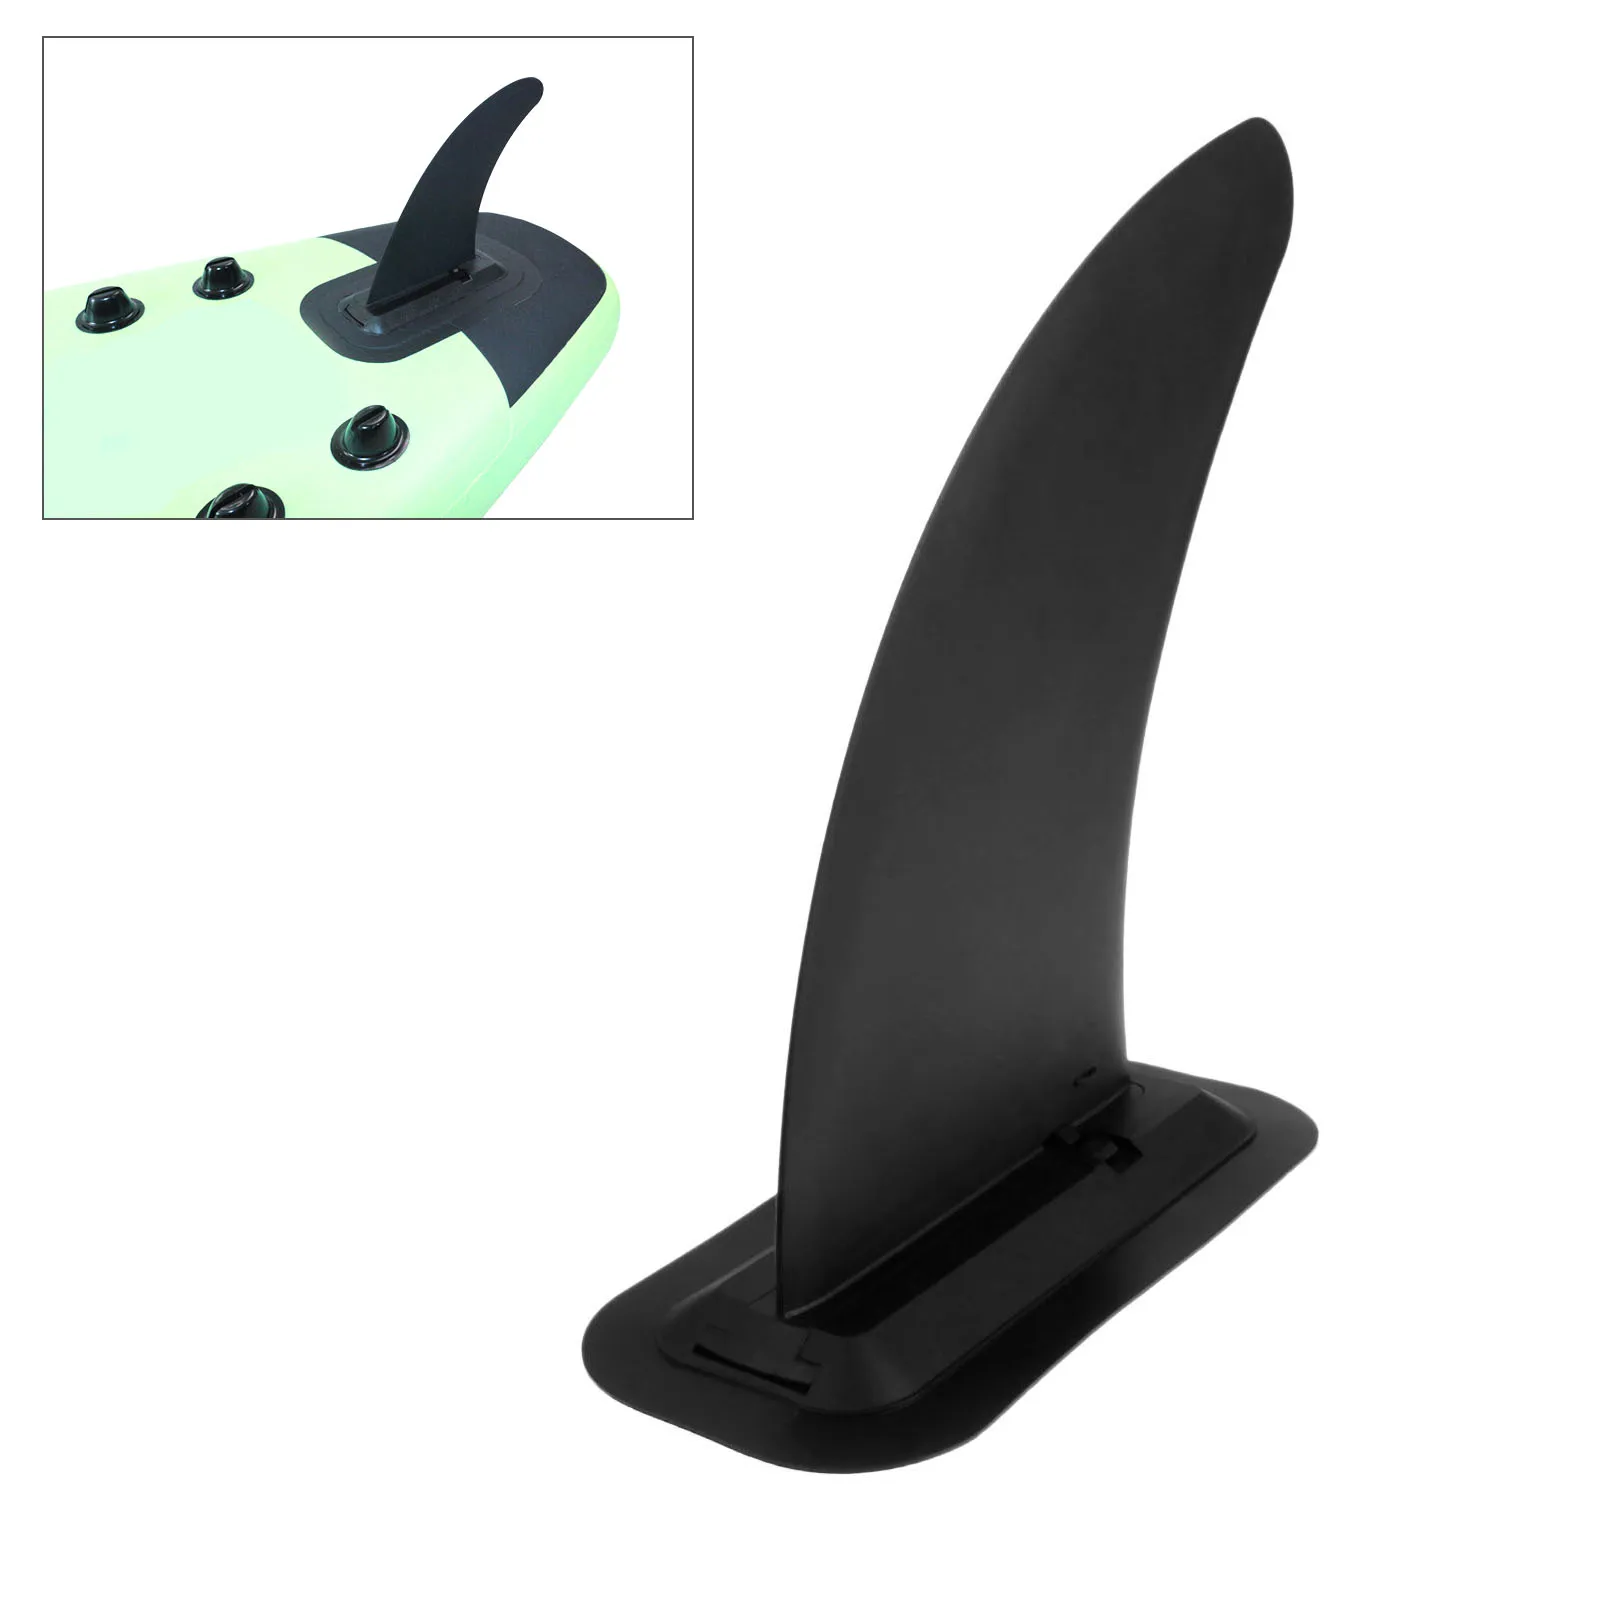 1 Set 11 Inch Surfboard Slide-in Central Side Fin Kayak Skeg Tracking Fin With PVC Fin Base - Sup Stand Up Paddle Board Surfing 1 pc universal inflatable boat kayak skeg tracking fin water wave fin slide in central small side fins for stand up paddle board